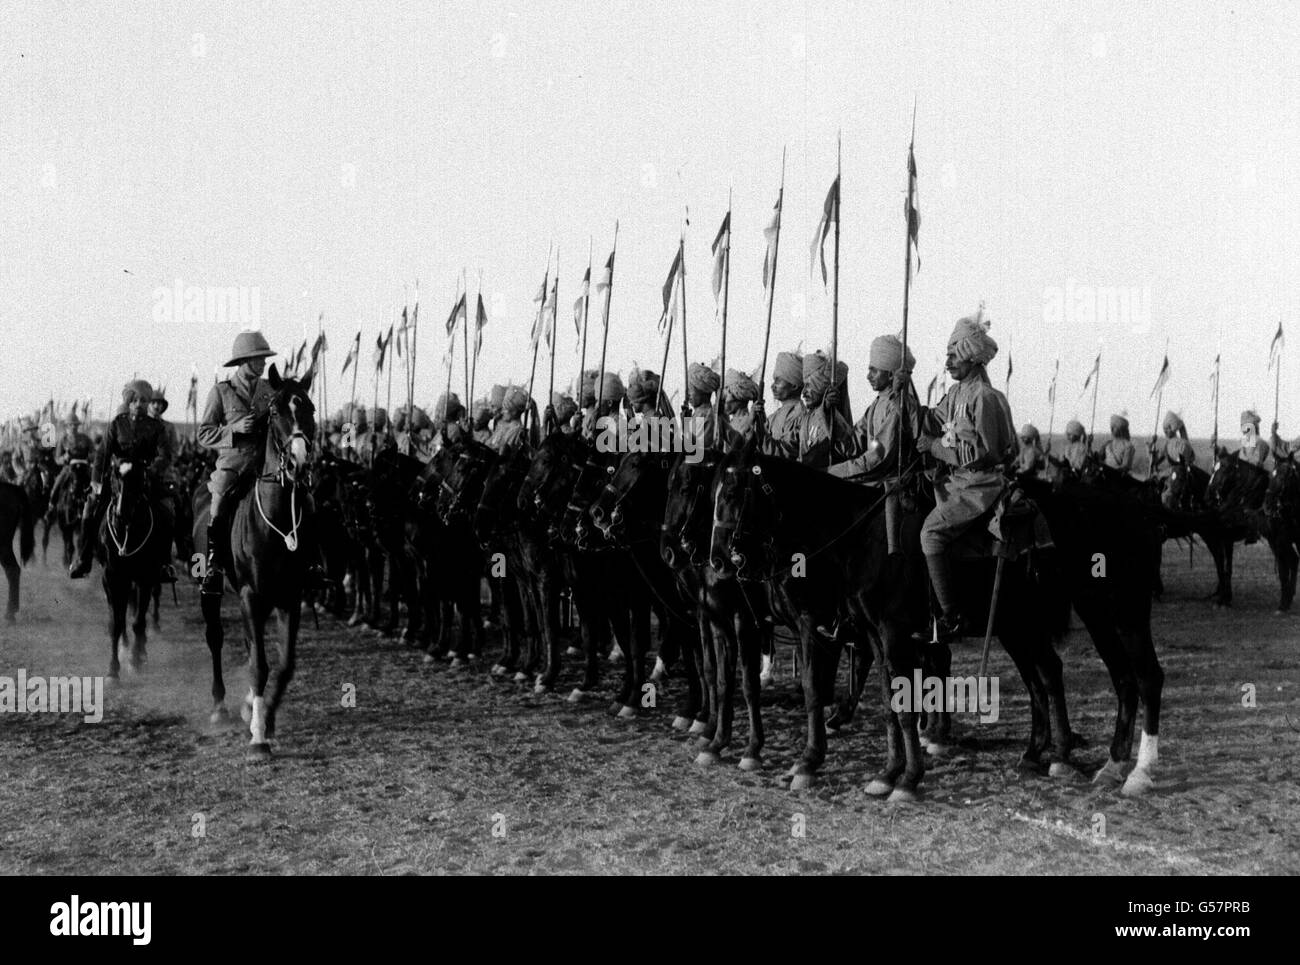 JODHPUR LANCERS 1921: The Prince of Wales' Tour of Japan and the East. The Prince of Wales (later King Edward VIII and Duke of Windsor) inspecting the Jodhpur Lancers who won fame on the Western Front during the First World War fighting alongside the British Army. *They were the model for novelist John Masters' 'Ravi Lancers'. Stock Photo